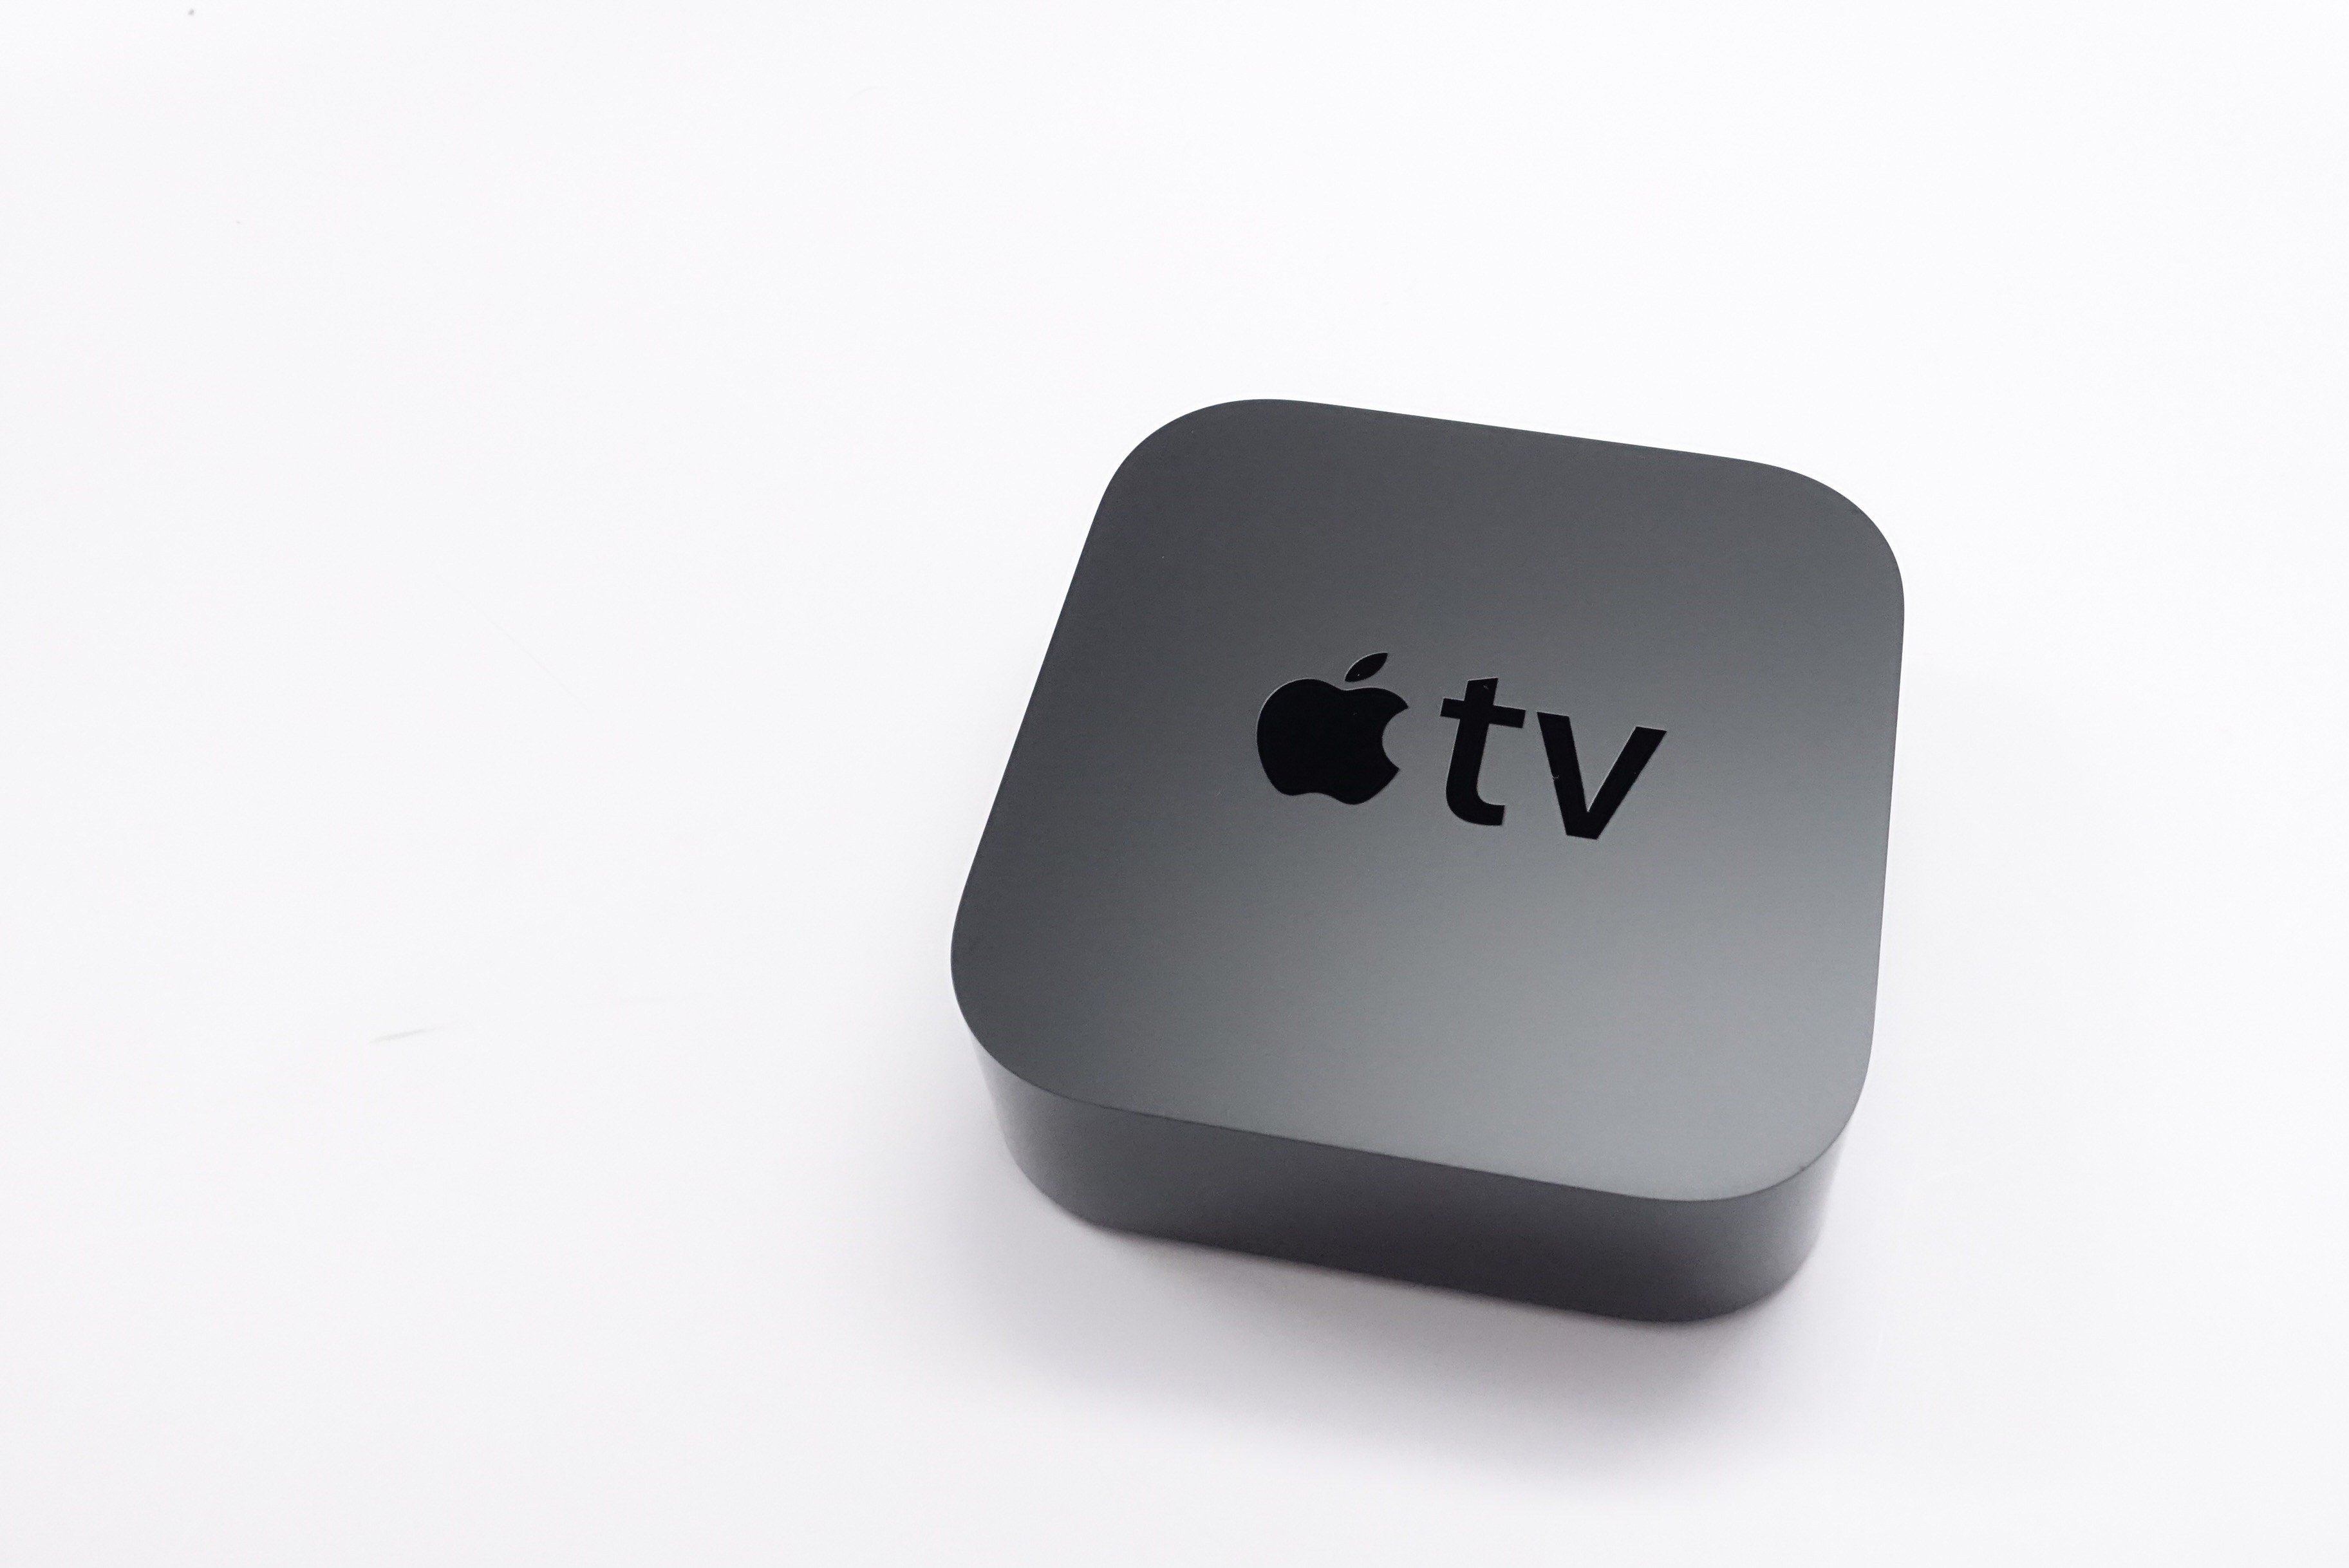 Should You Buy the 32GB or 64GB Apple TV 4K?